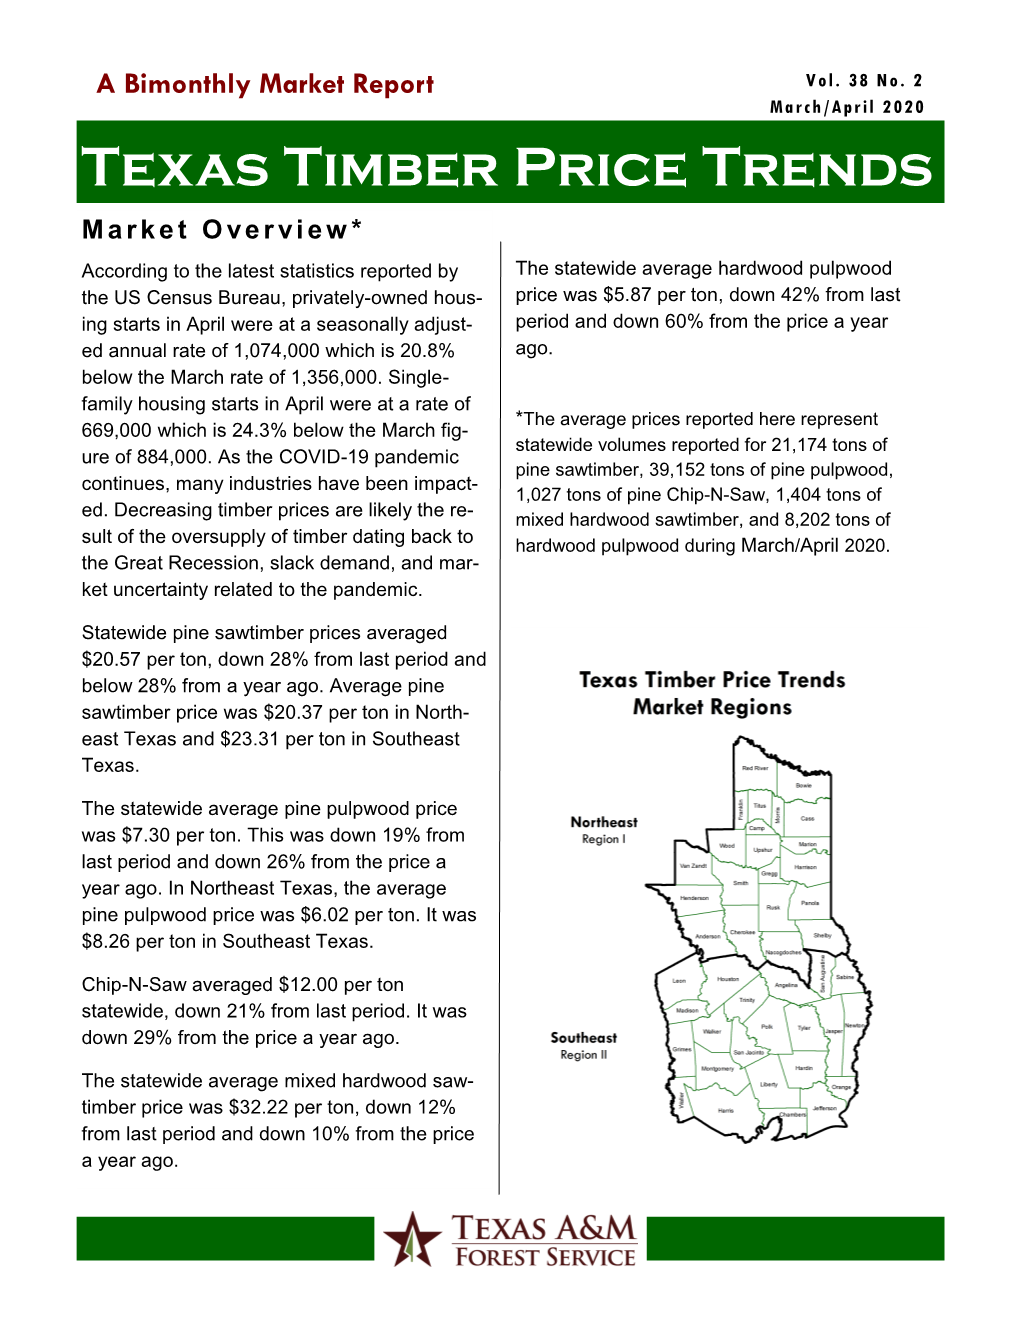 Texas Timber Price Trends March/April 2020 Stumpage Prices in Texas